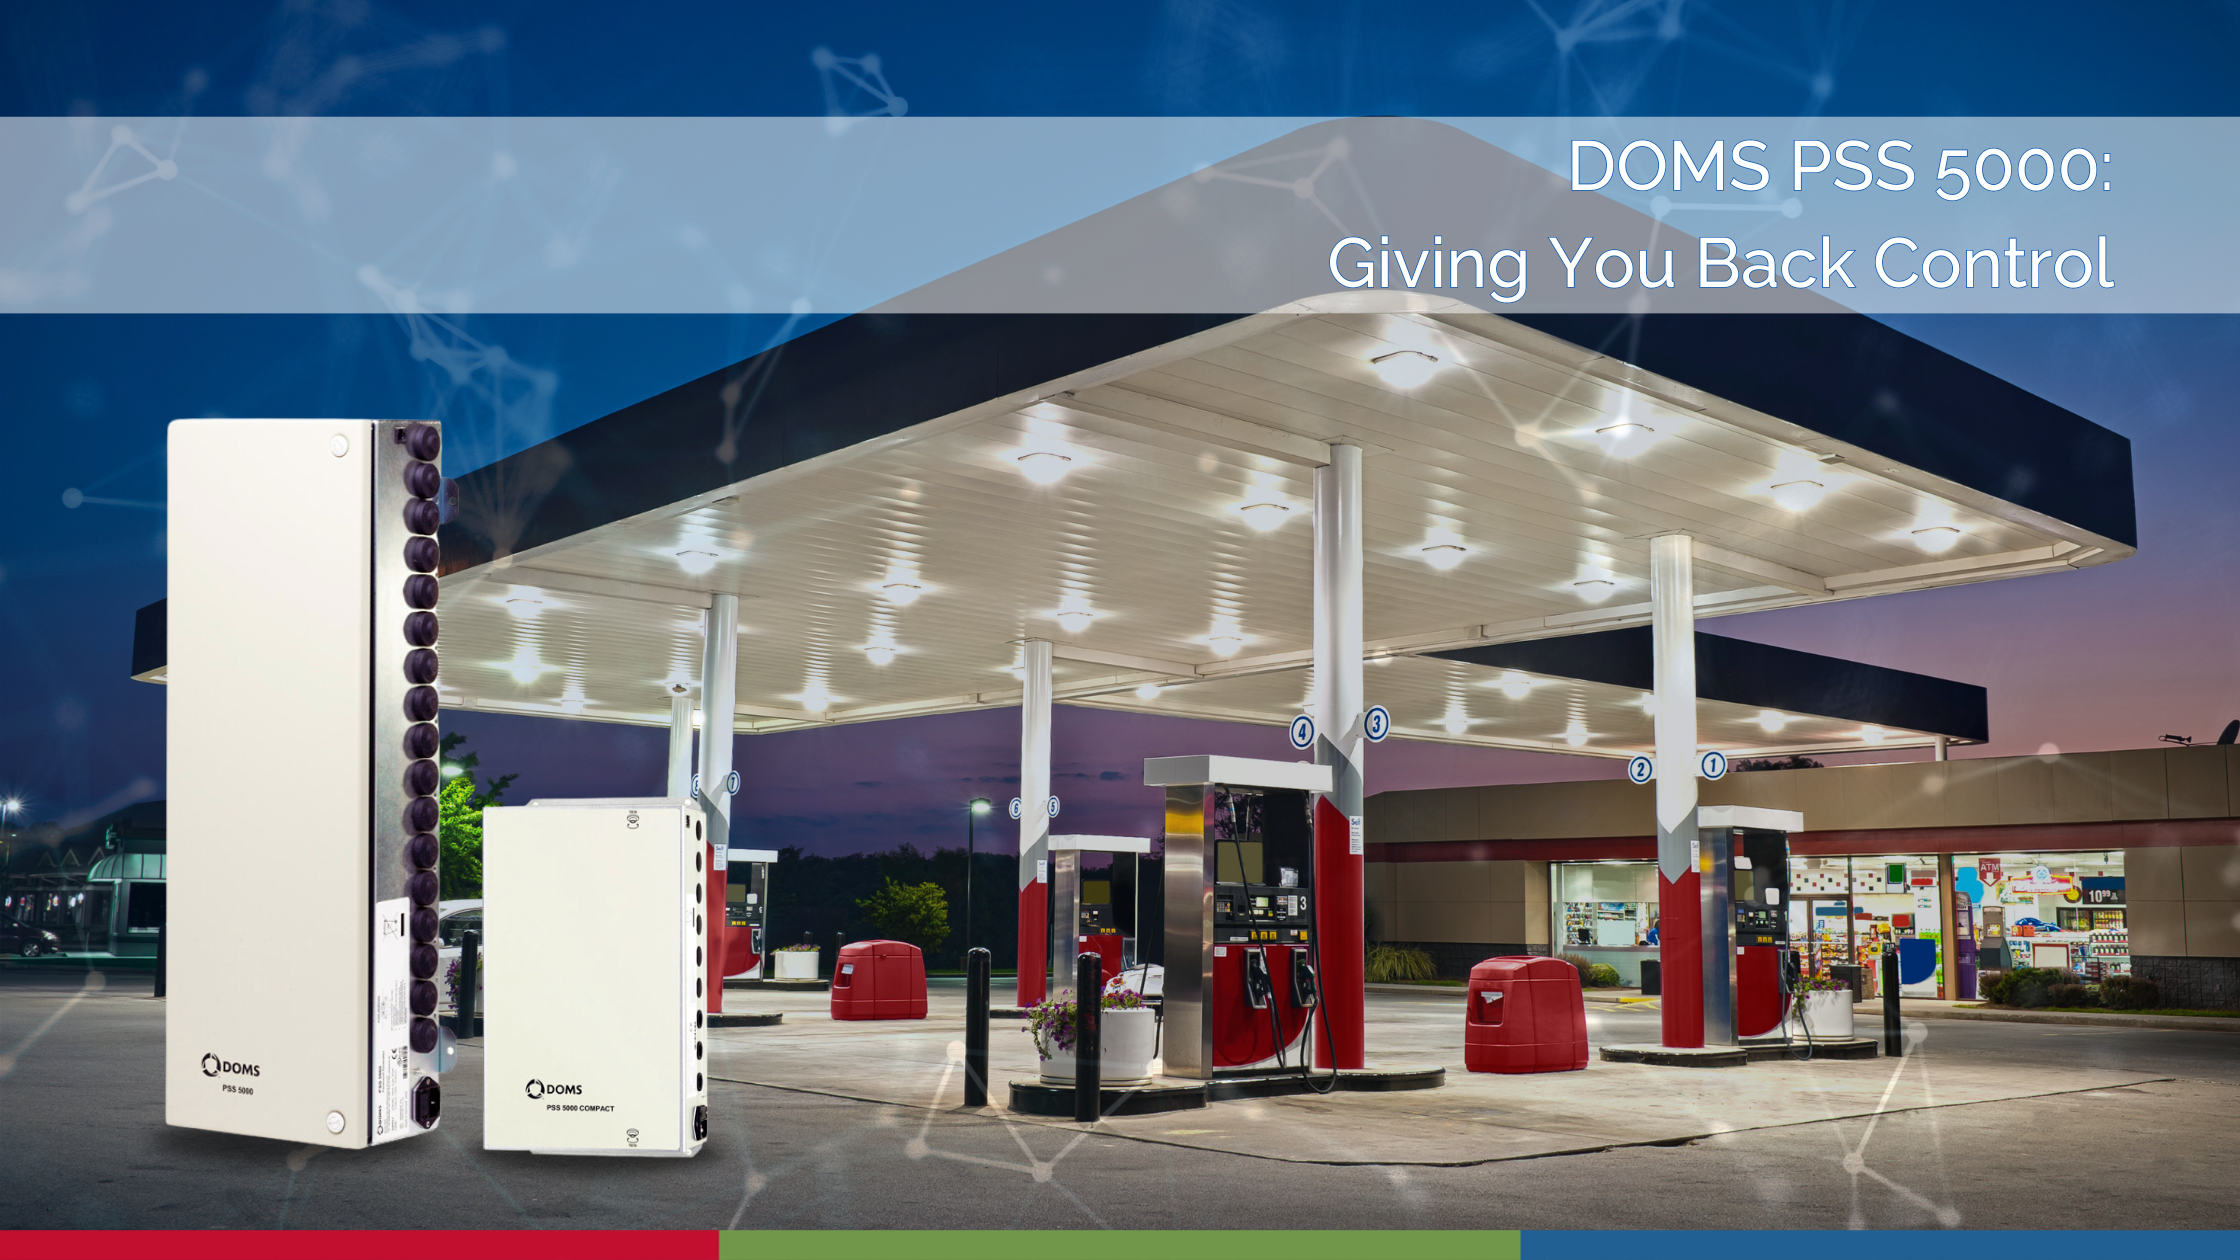 Keep control over every aspect of your forecourt with a device that creates the perfect forecourt management system: the DOMS PSS 5000 forecourt controller